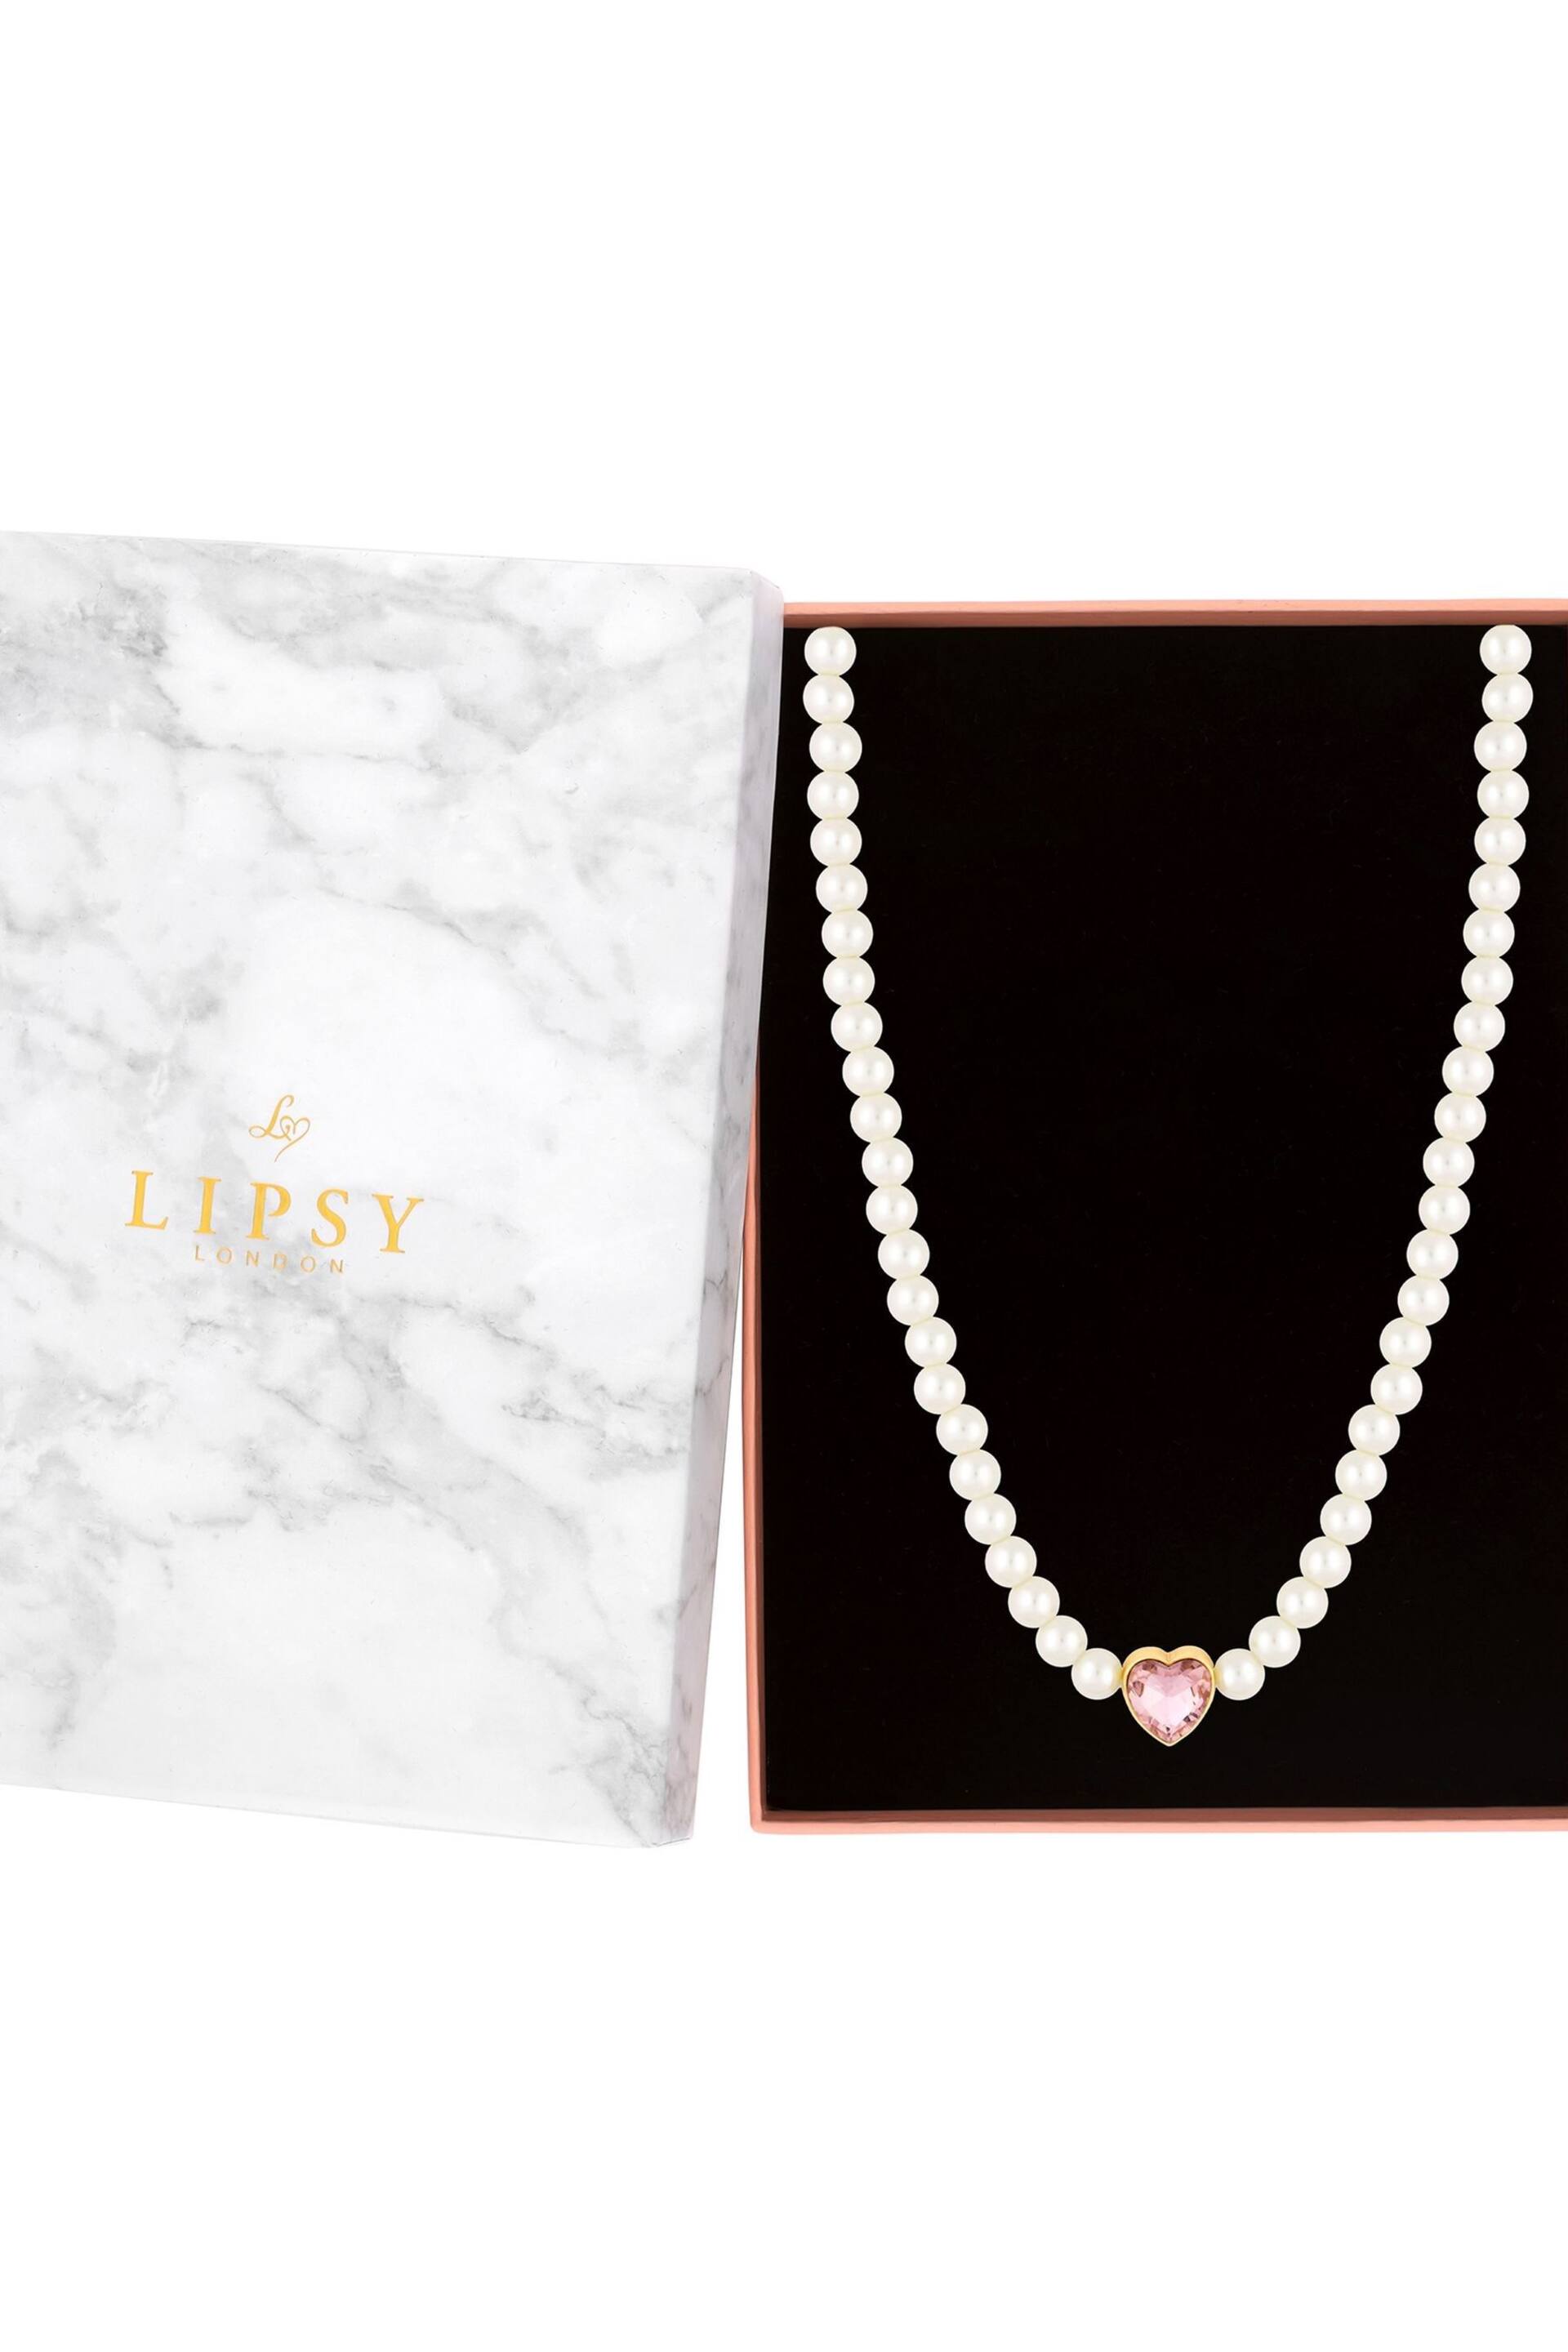 Lipsy Jewellery Gold Tone Pearl Heart Choker Gift Boxed Necklace - Image 1 of 4